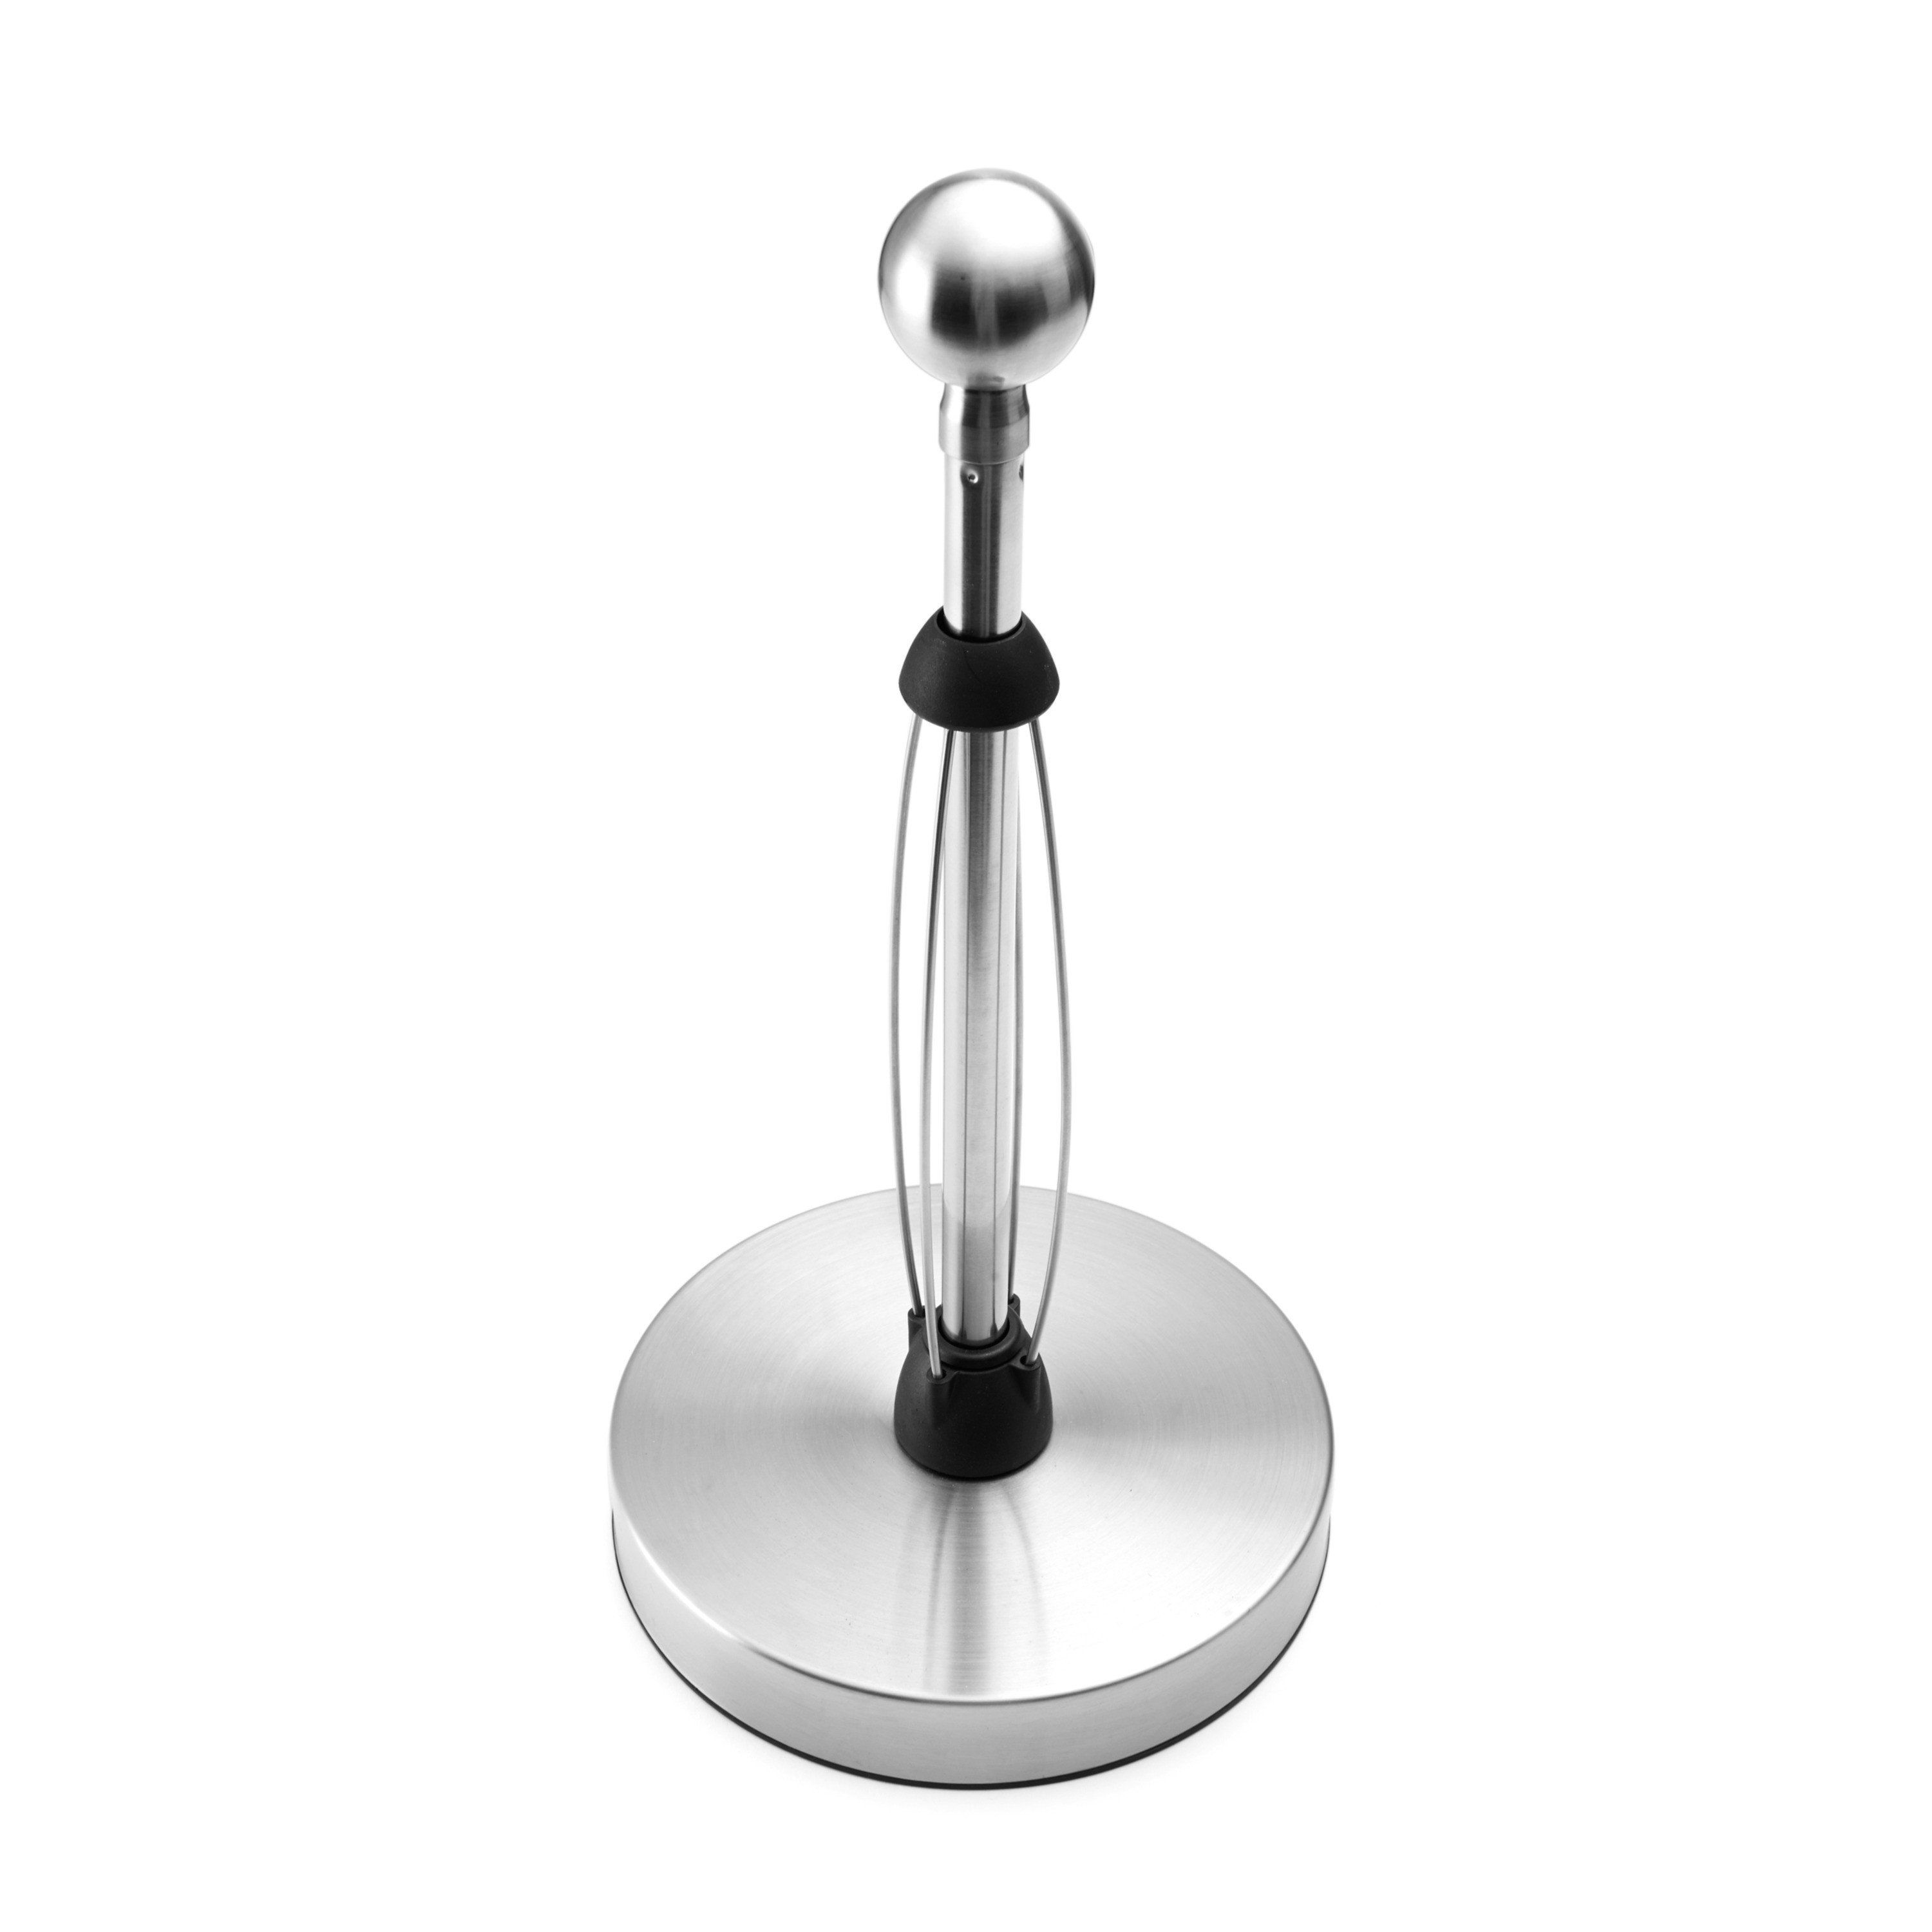 Kamenstein Ball Finial Perfect Tear Paper Towel Holder - image 2 of 7